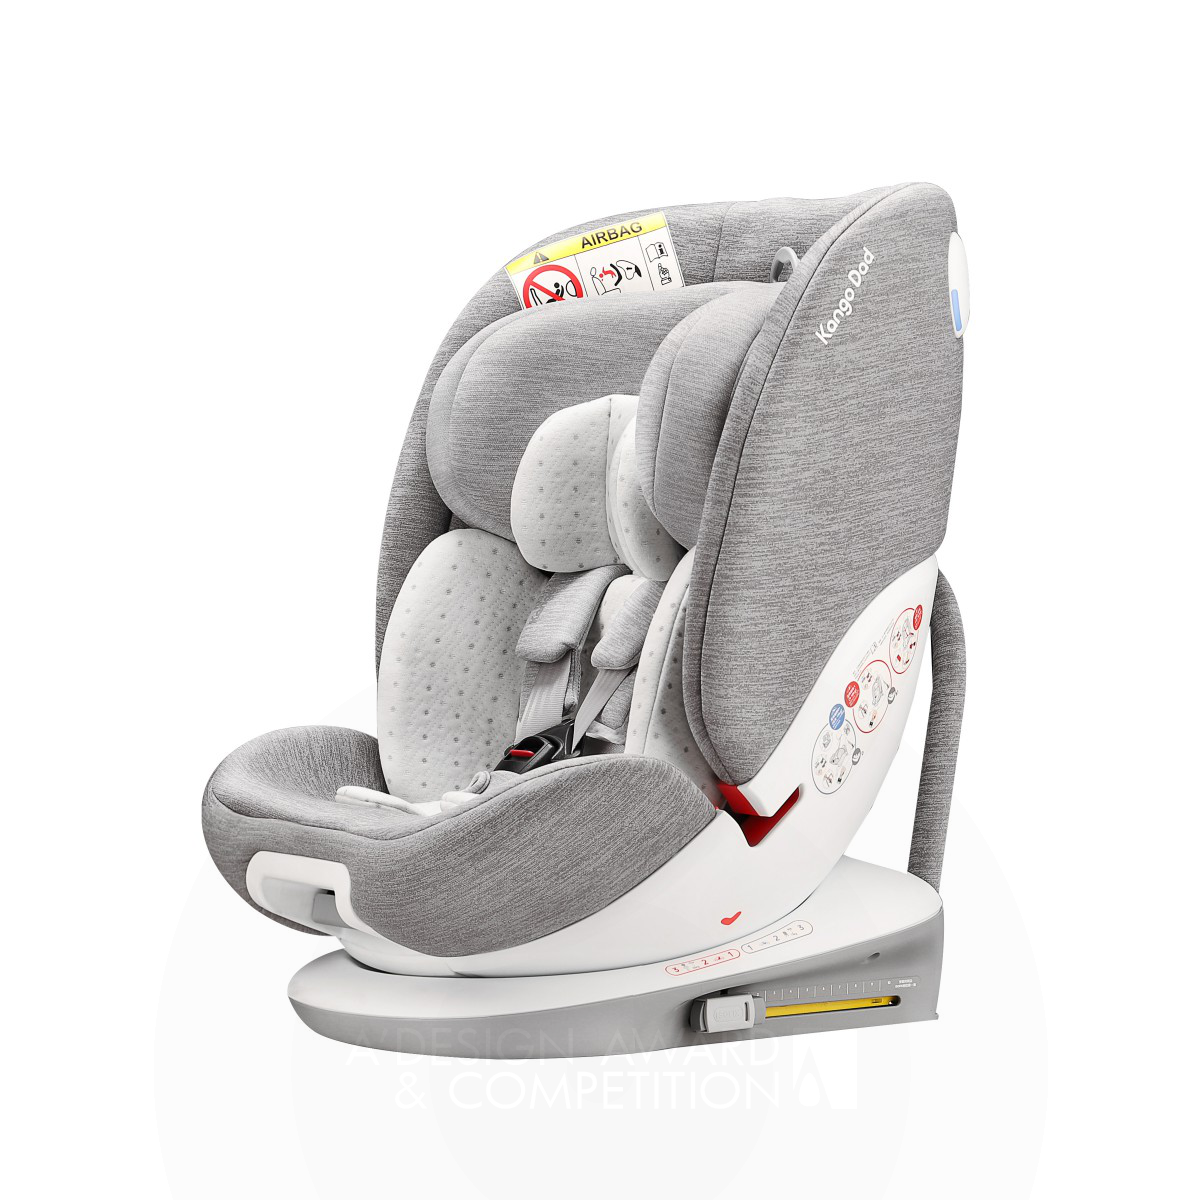 Ningbo Baby First Baby Products Co., Ltd Baby Car Seat 